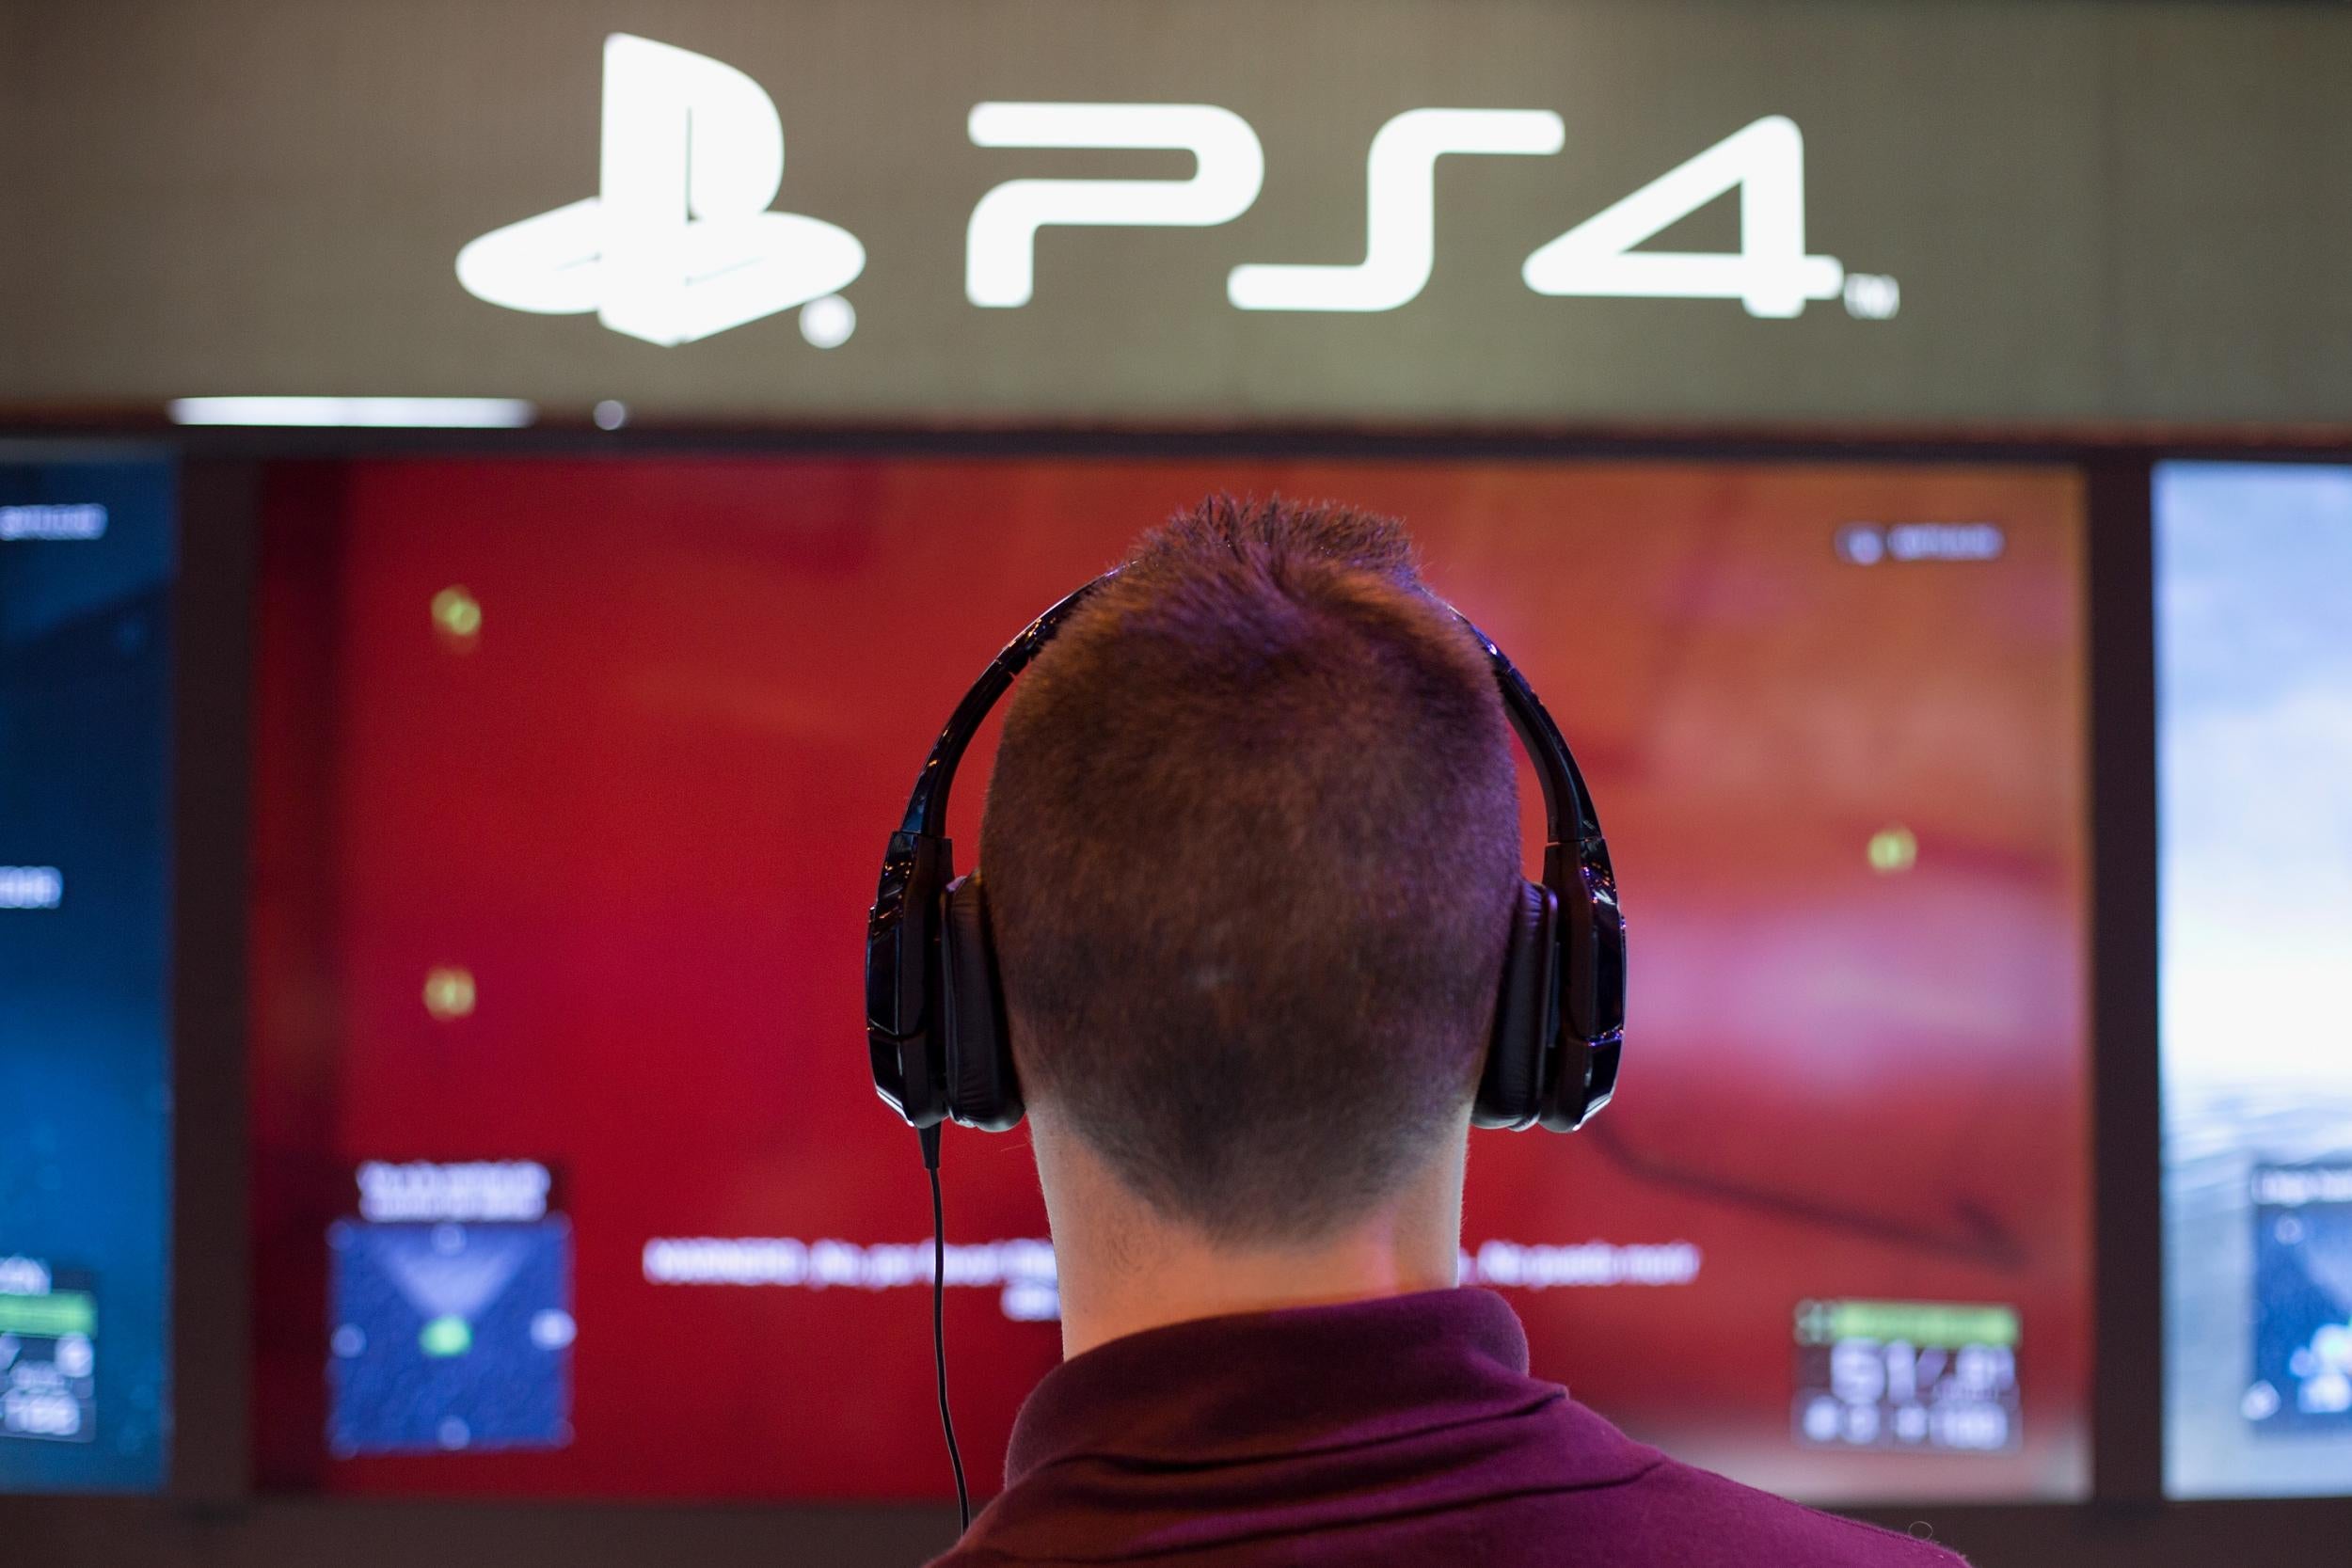 The new software is not authorised by Sony and could be shut down at any point